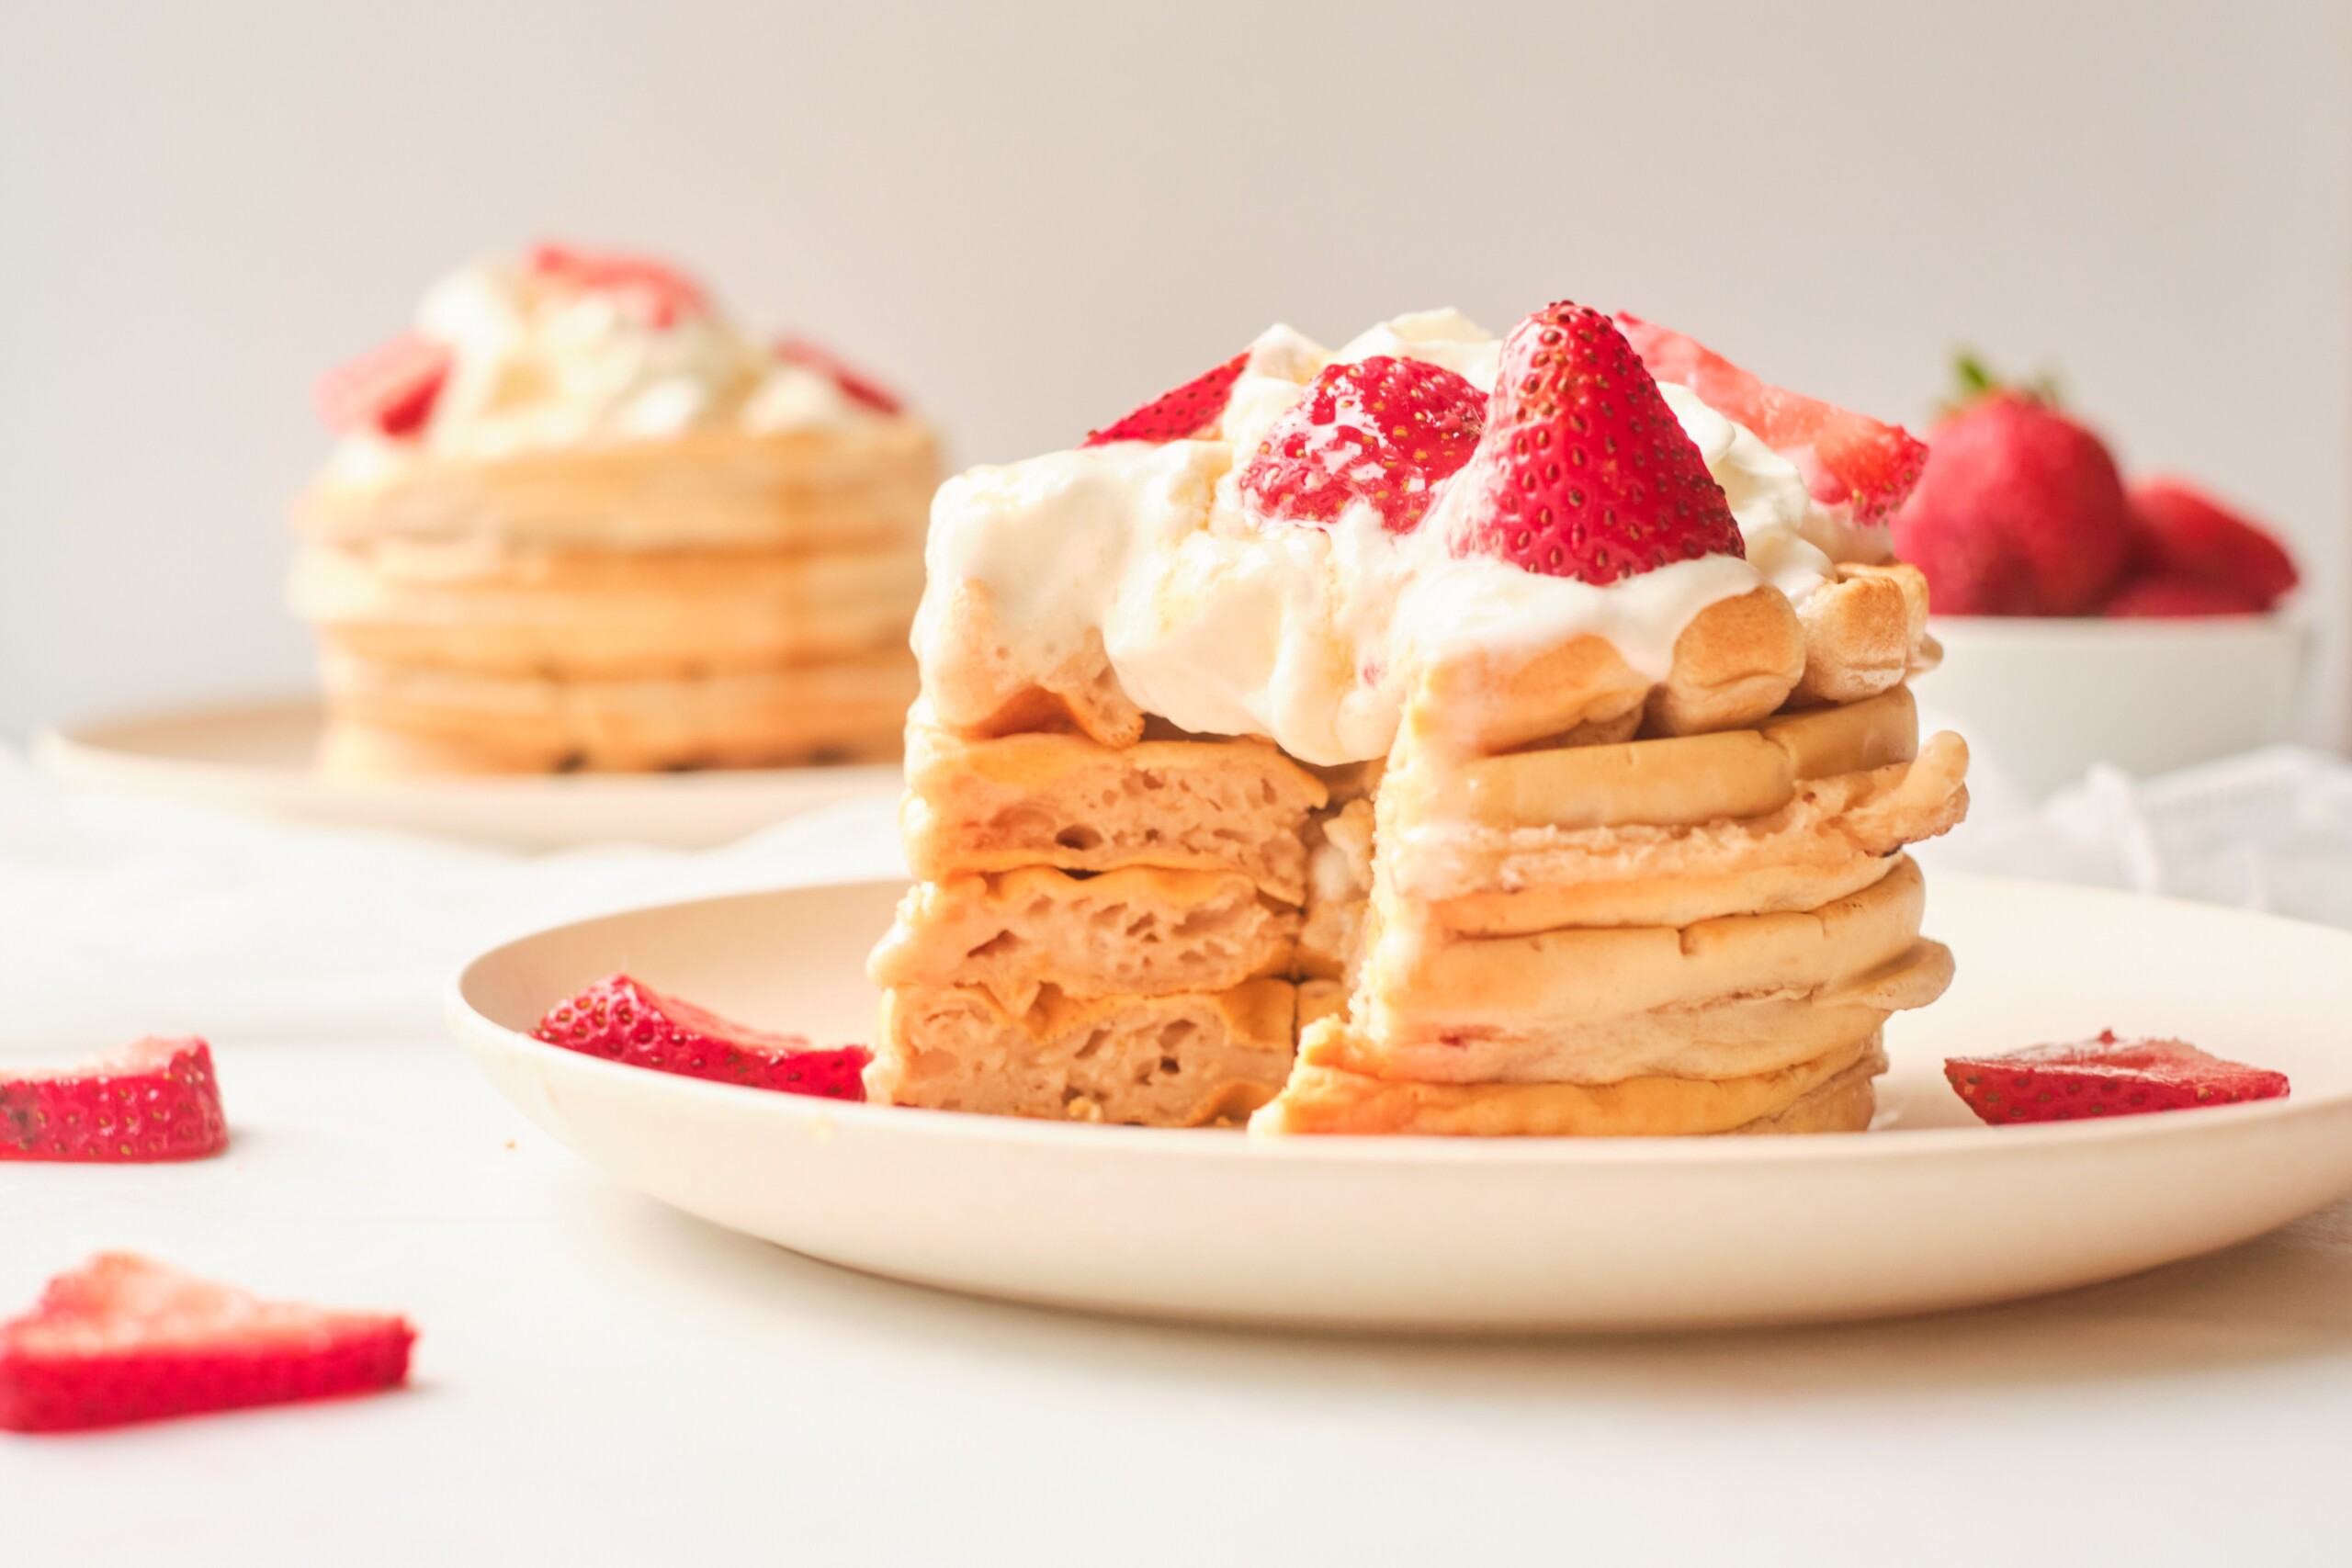 Centre view of a stacked waffle with strawberries and cream.